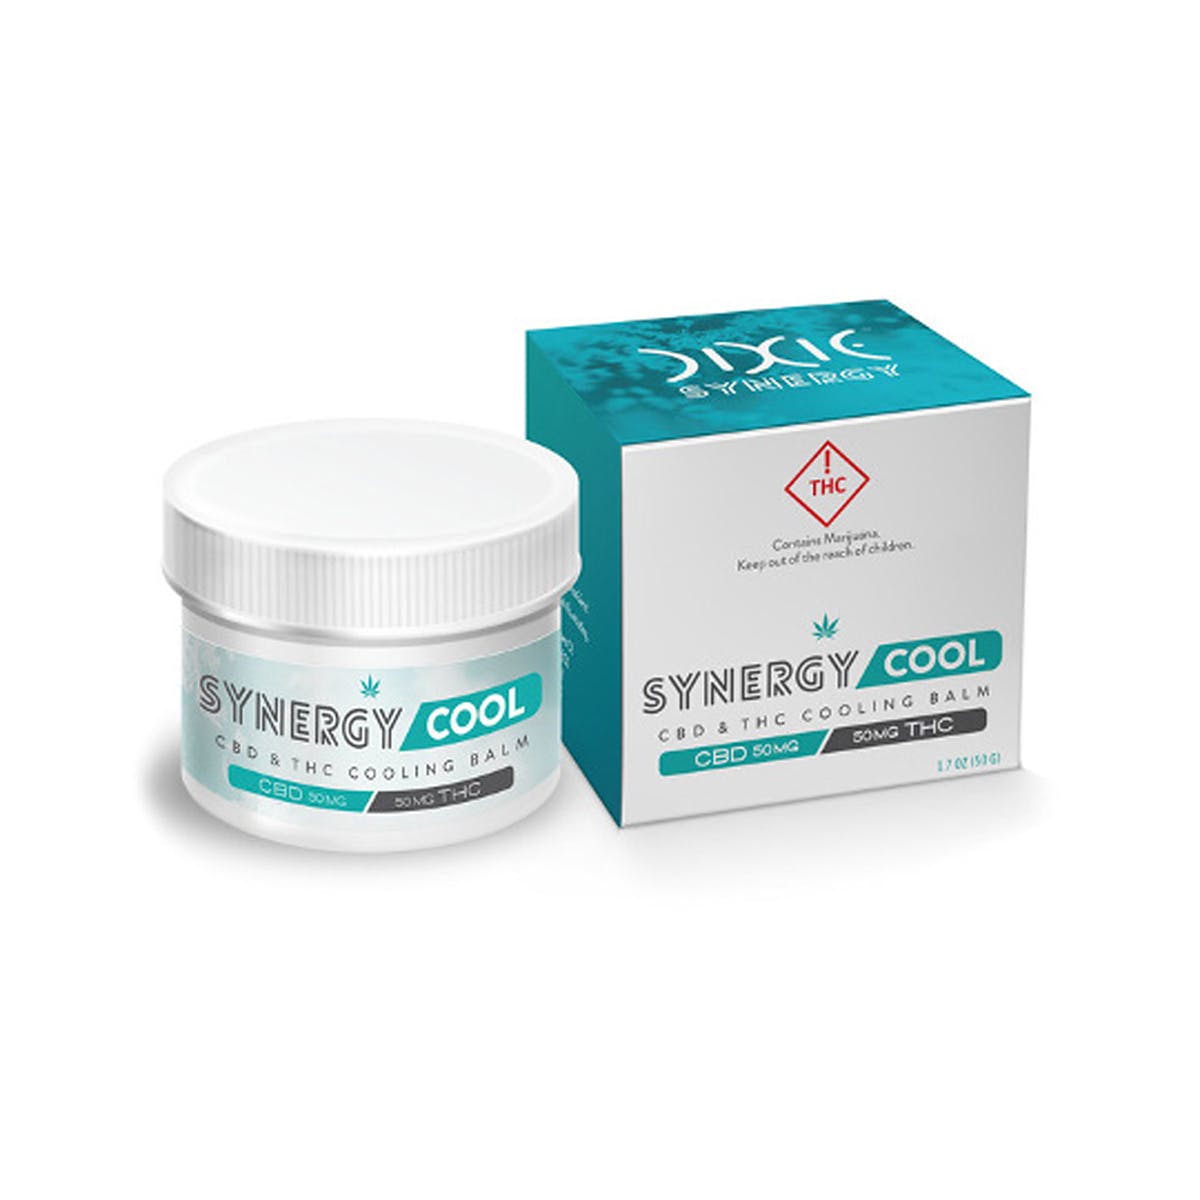 topicals-synergy-cool-cbd-a-thc-cooling-balm